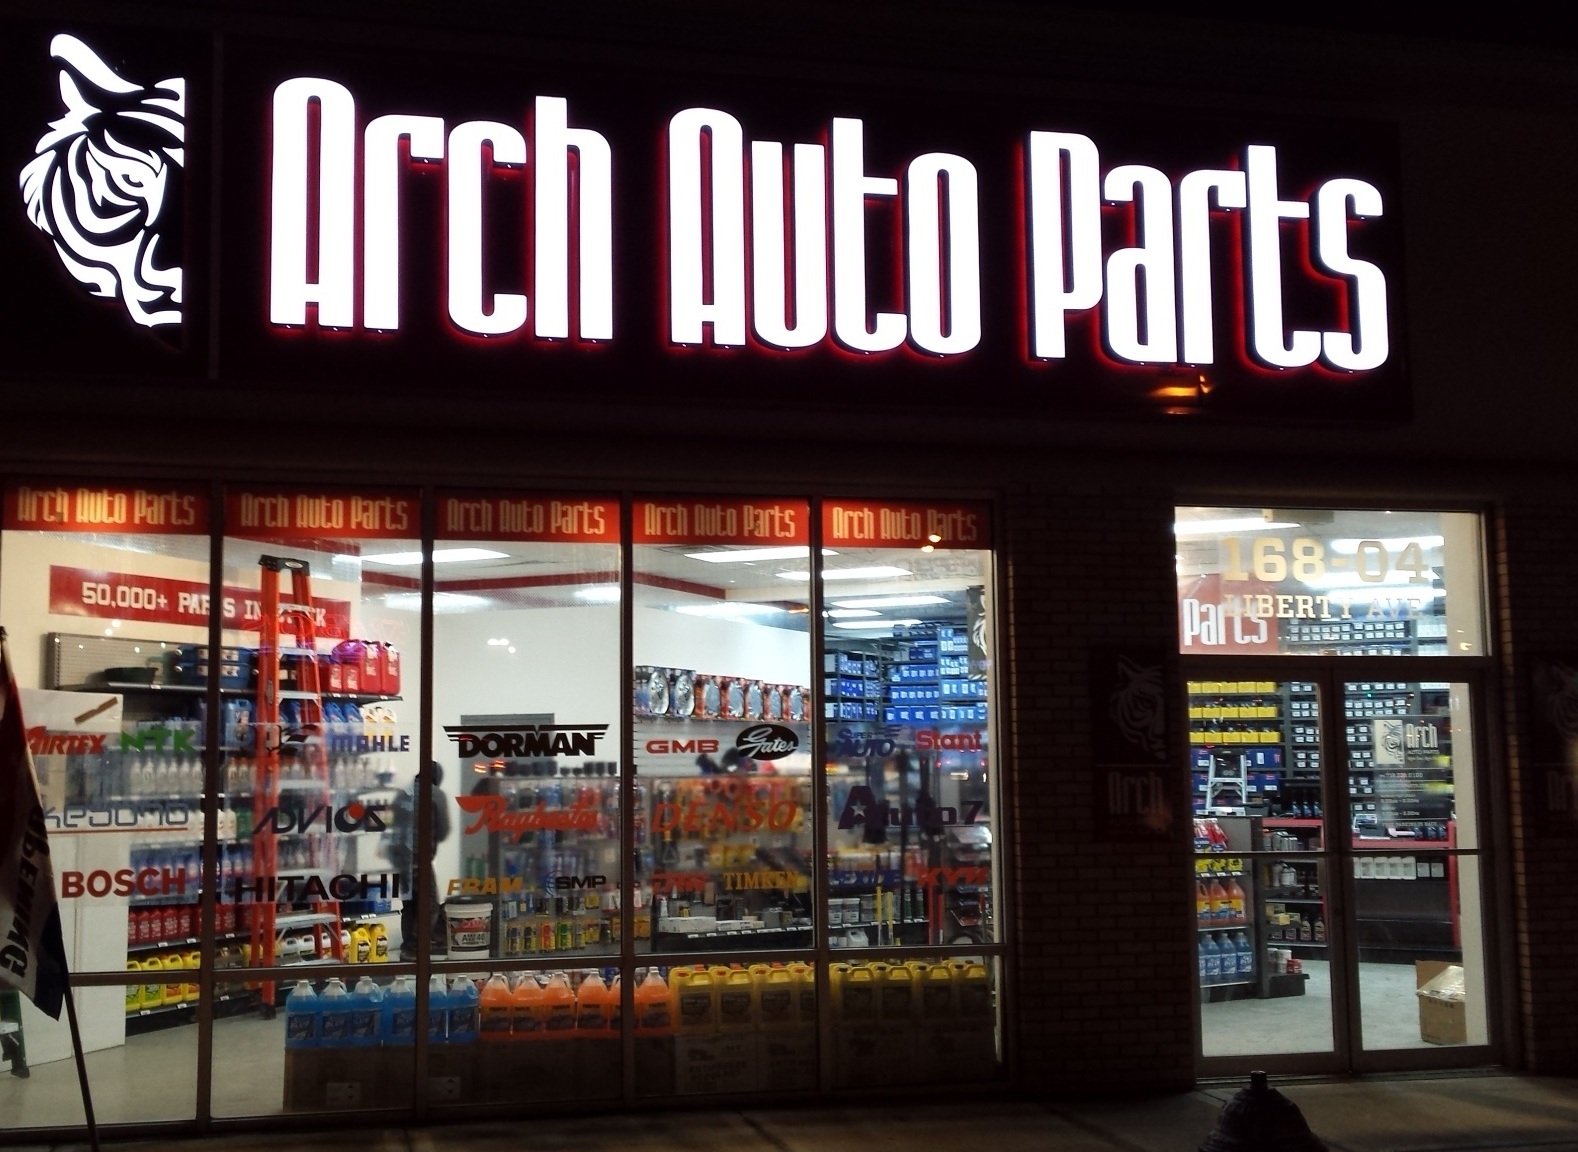 Arch Auto Parts, Corner of Liberty Ave and Merrick Blvd Jamaica, Queens now open Mon-Sat 8am-6pm, and Sunday 9am-5pm.